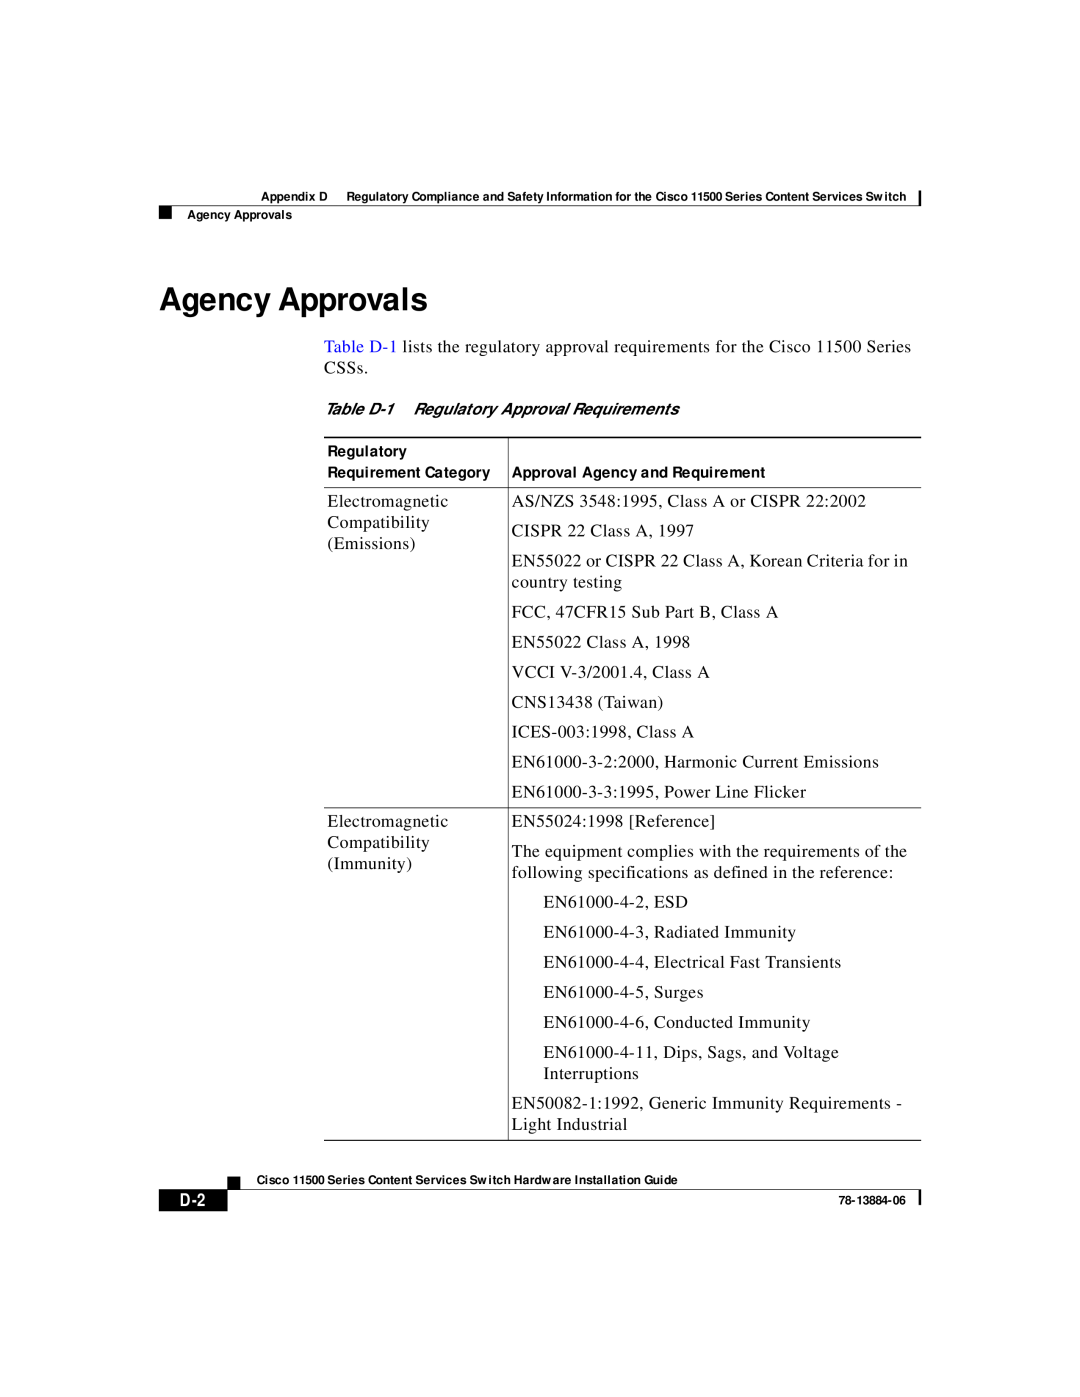 Cisco Systems 11501, 11506, 11503, 11500 appendix Agency Approvals 